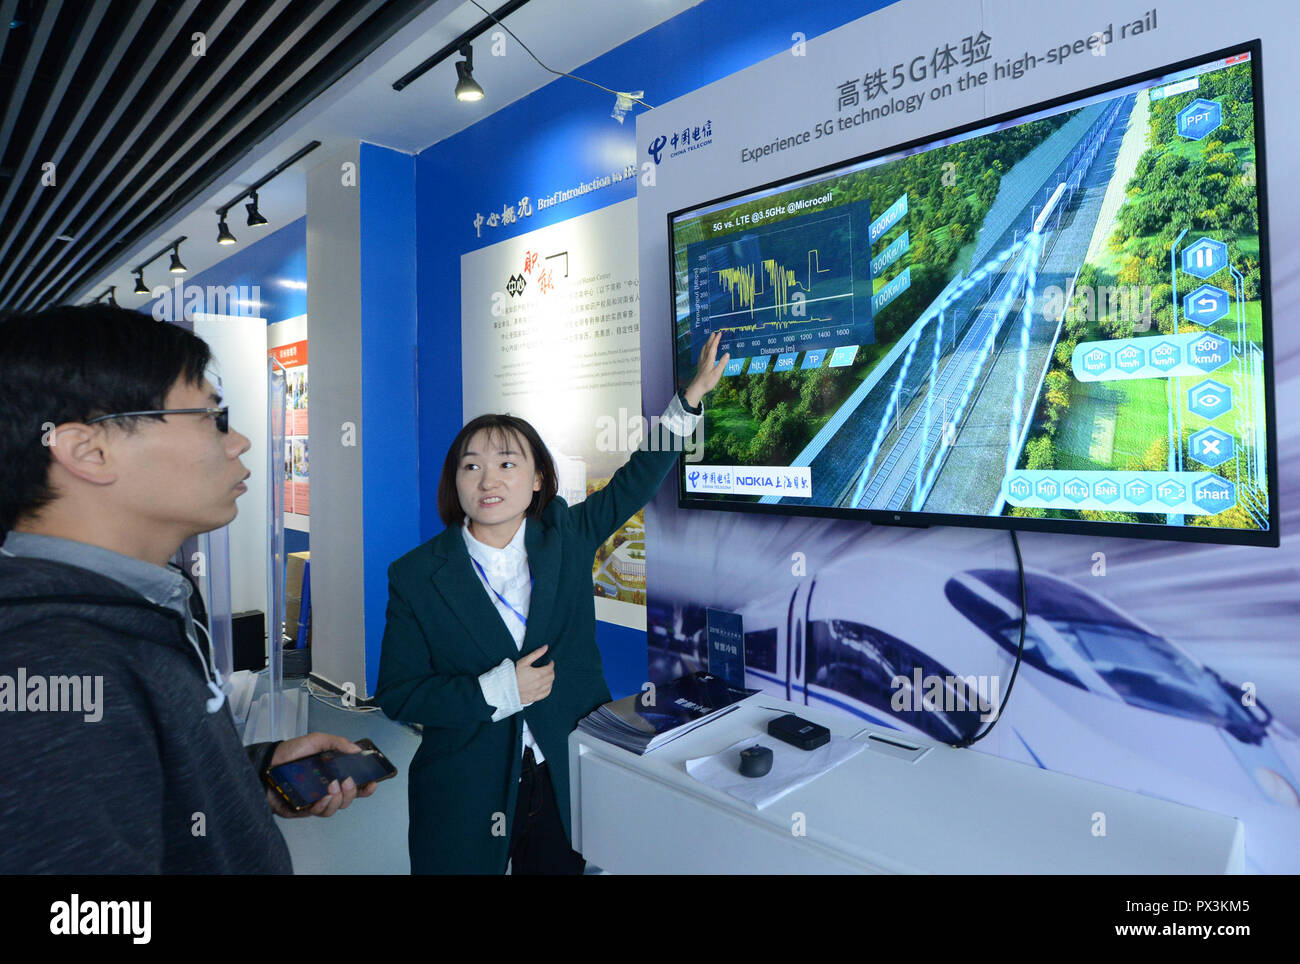 October 19, 2018 - Zhengzhou, Zhengzhou, China - Zhengzhou,CHINA-The 5G technology conference is held in Zhengzhou, central ChinaÃ¢â‚¬â„¢s Henan Province. The 5G industry undergoes rapid development in recent years in China. (Credit Image: © SIPA Asia via ZUMA Wire) Stock Photo